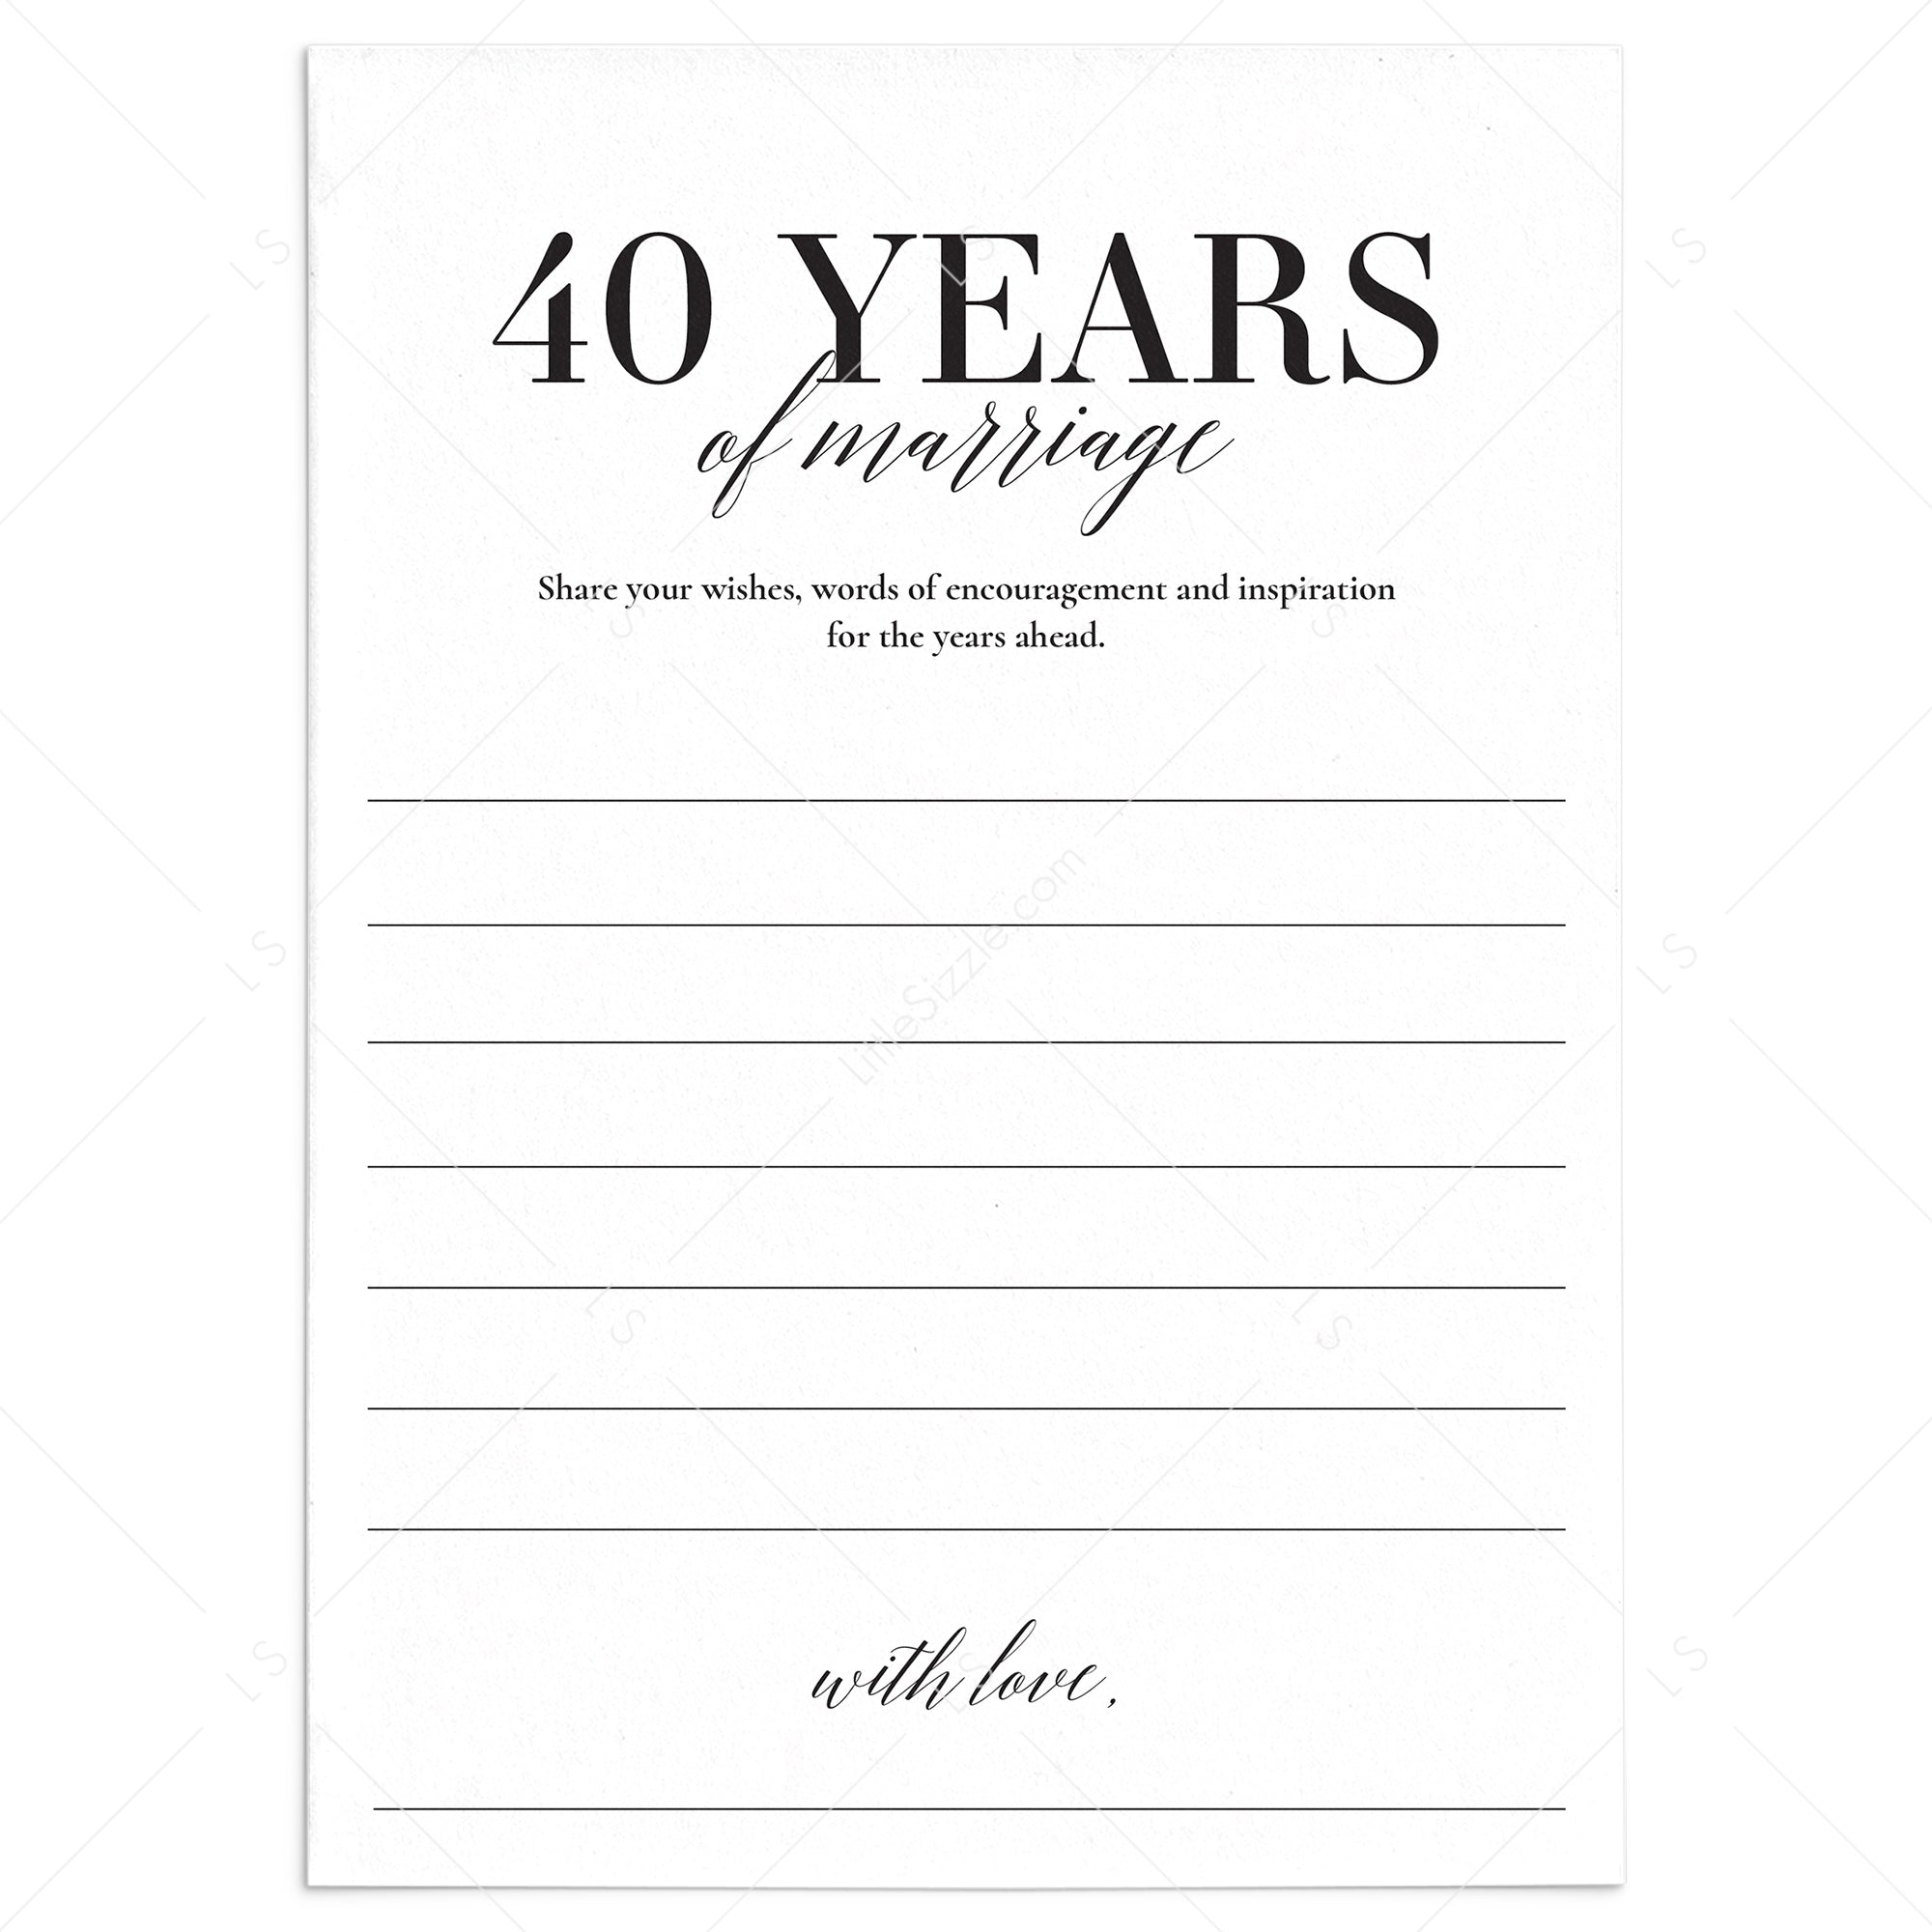 40th Wedding Anniversary Wishes & Advice Card Printable by LittleSizzle